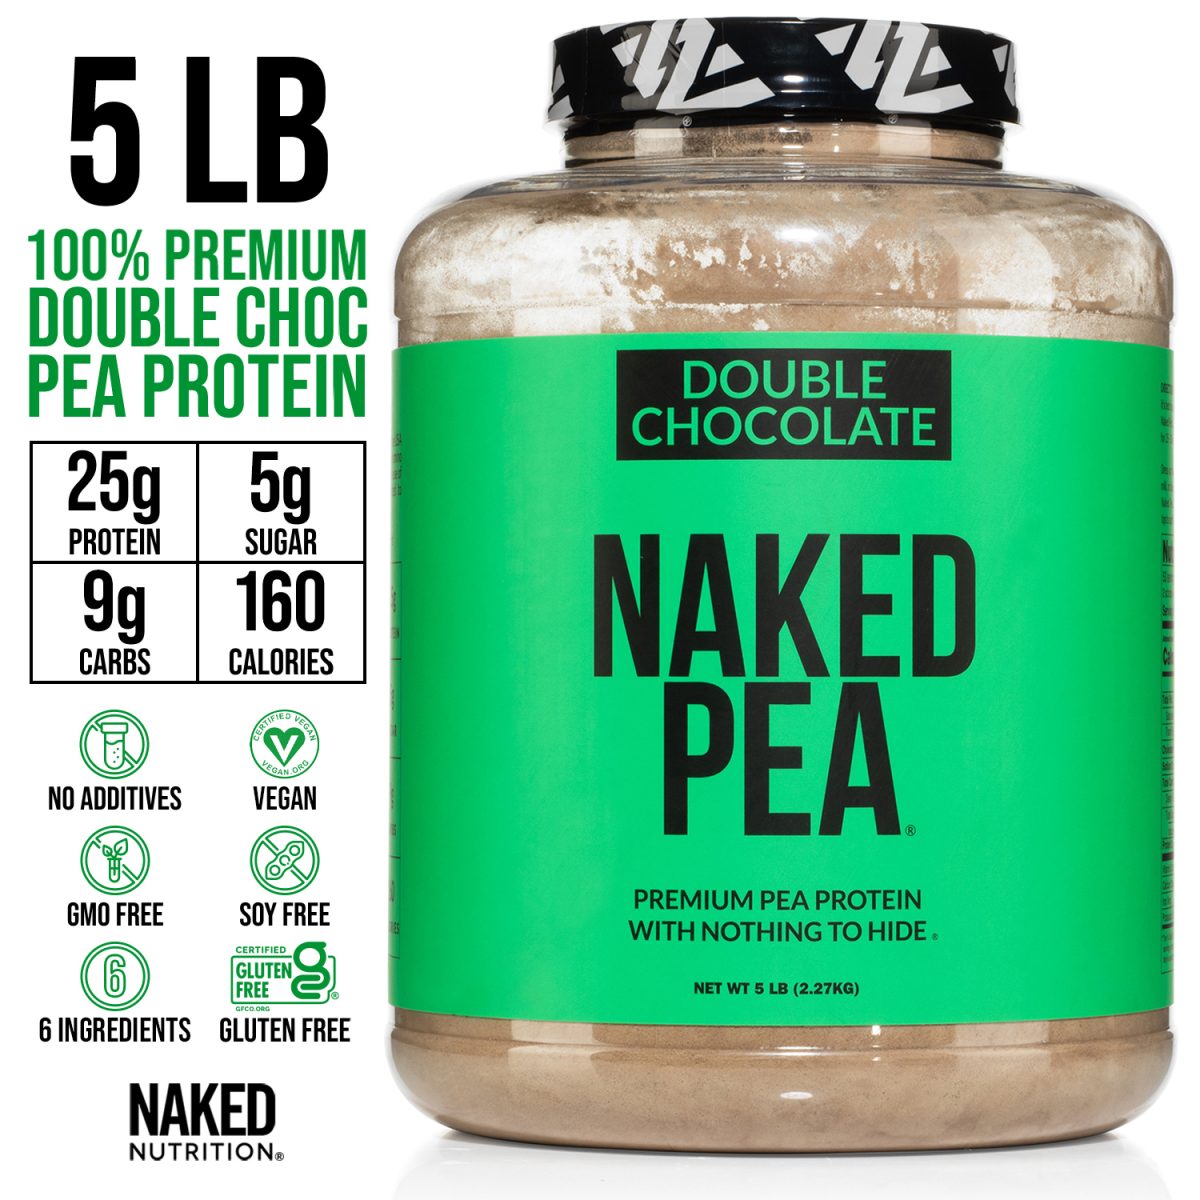 Only 6 ingredients in the double chocolate naked pea protein!